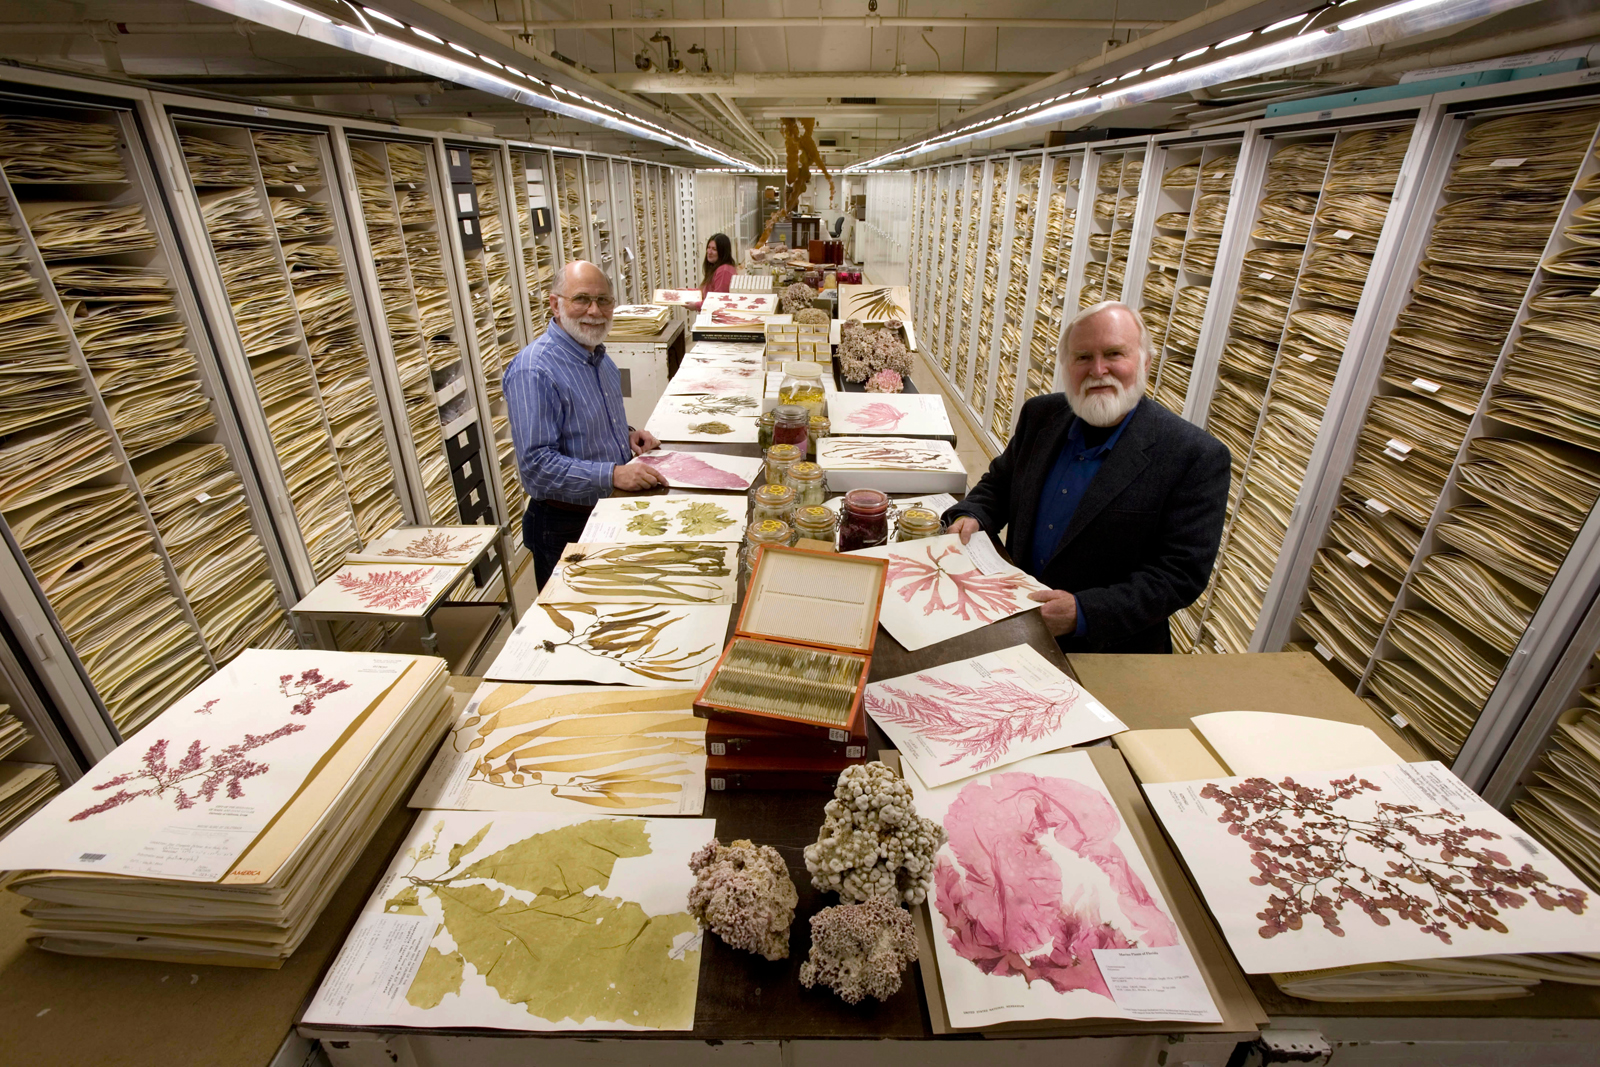 The Botany Department Herbarium at the Smithsonian Institution's National Museum of Natural History, displaying algae specimens, including coraline algae, wet specimens and the usual herbarium sheets. Featured researchers:  Dr. James Norris (right, front), his research assistant Bob Sims (left, front), and associate researcher, Katie Norris (left, back).